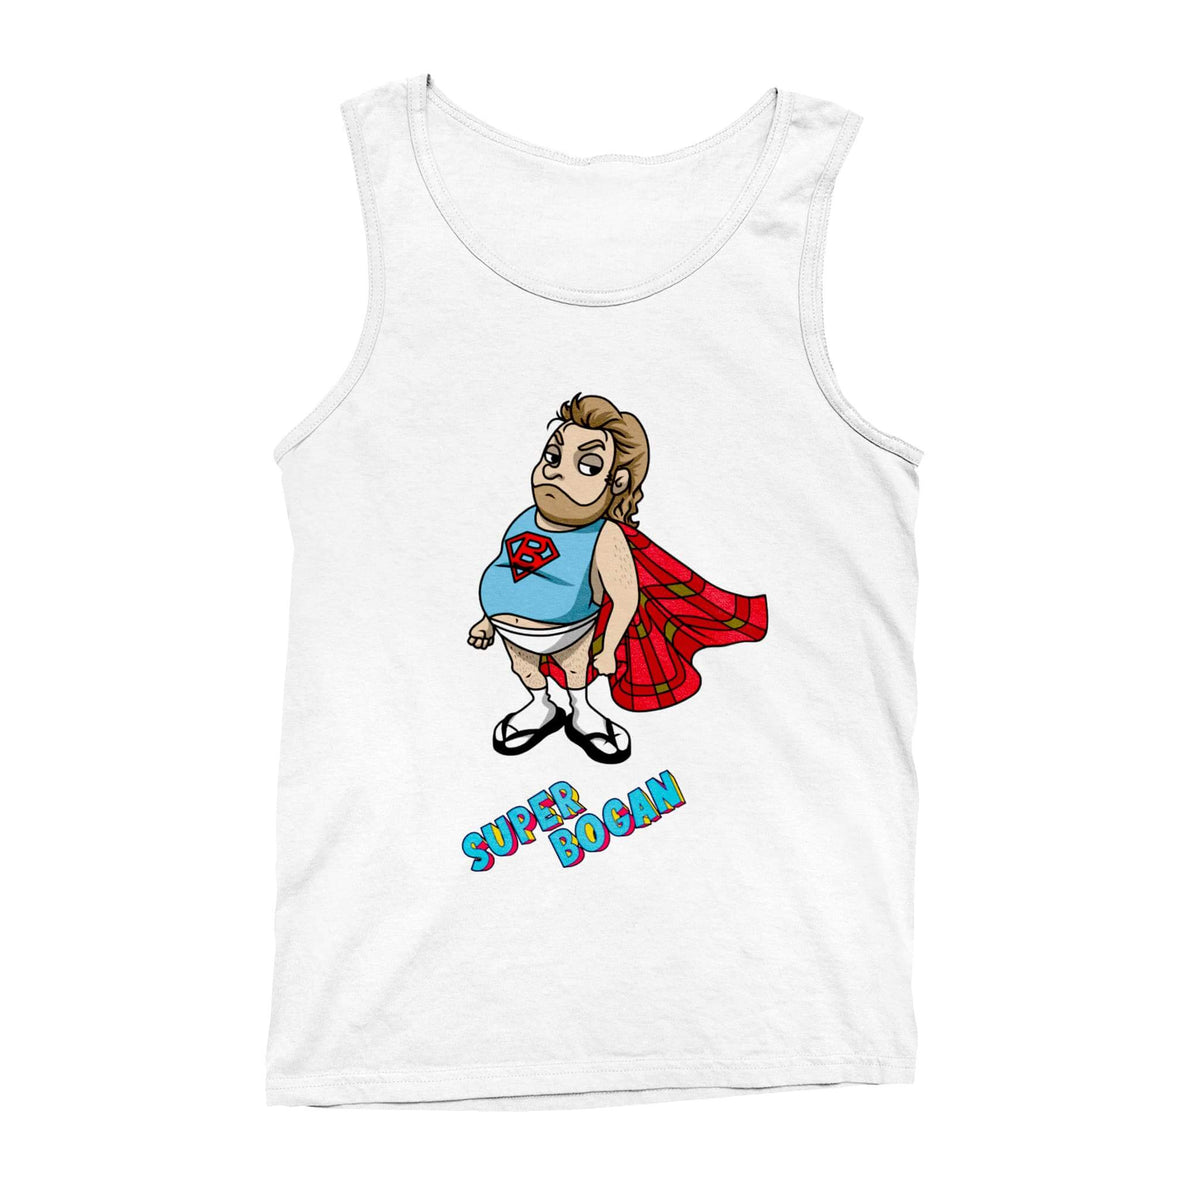 Men's white tank top with Super Bogan character on the front